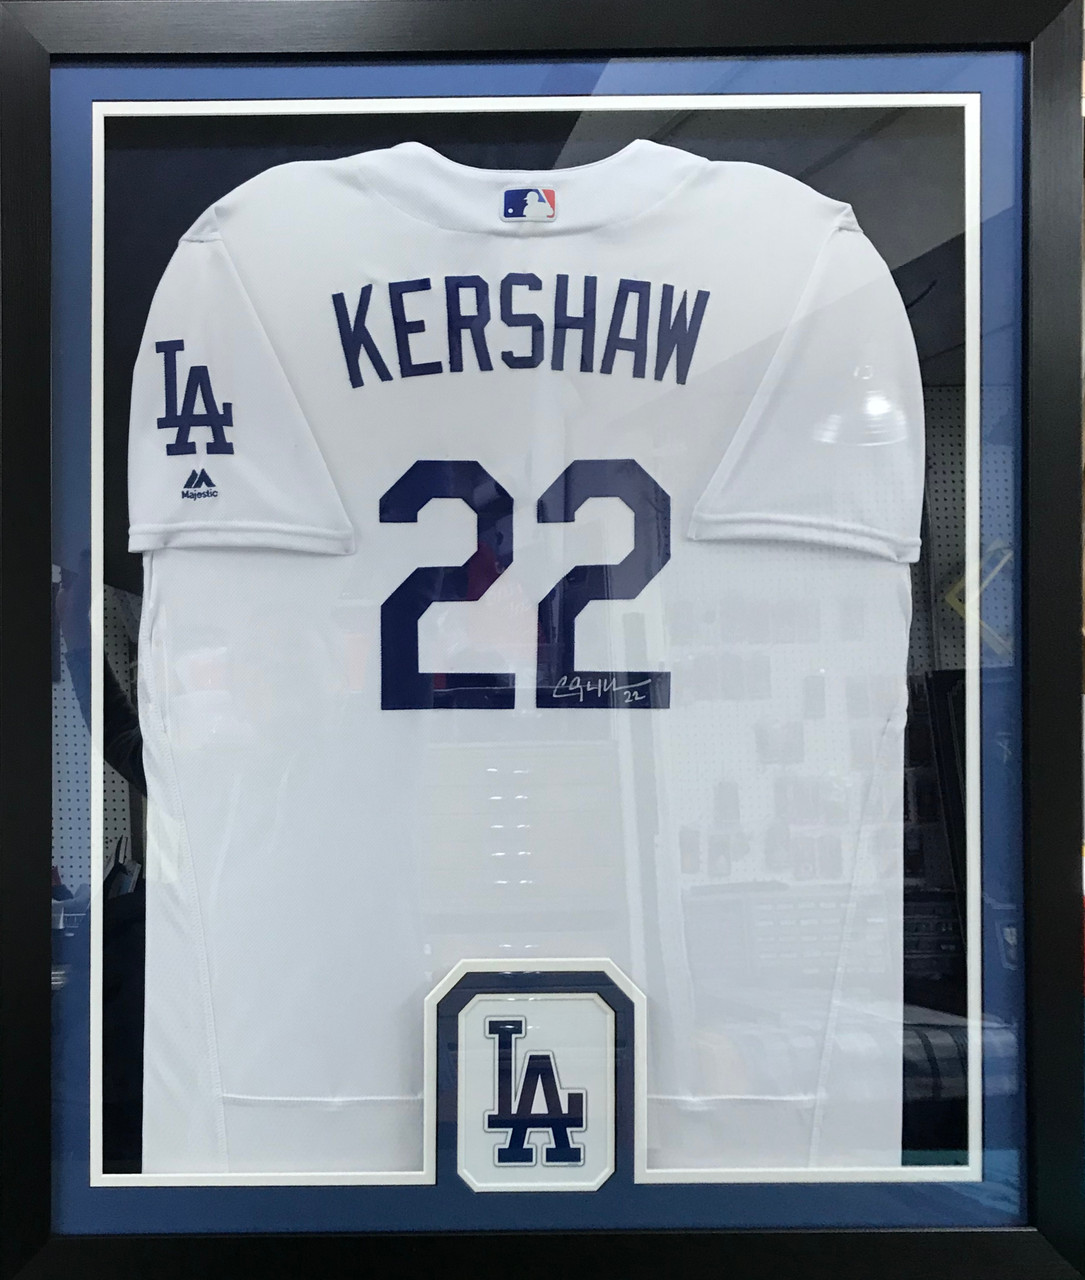 kershaw signed jersey